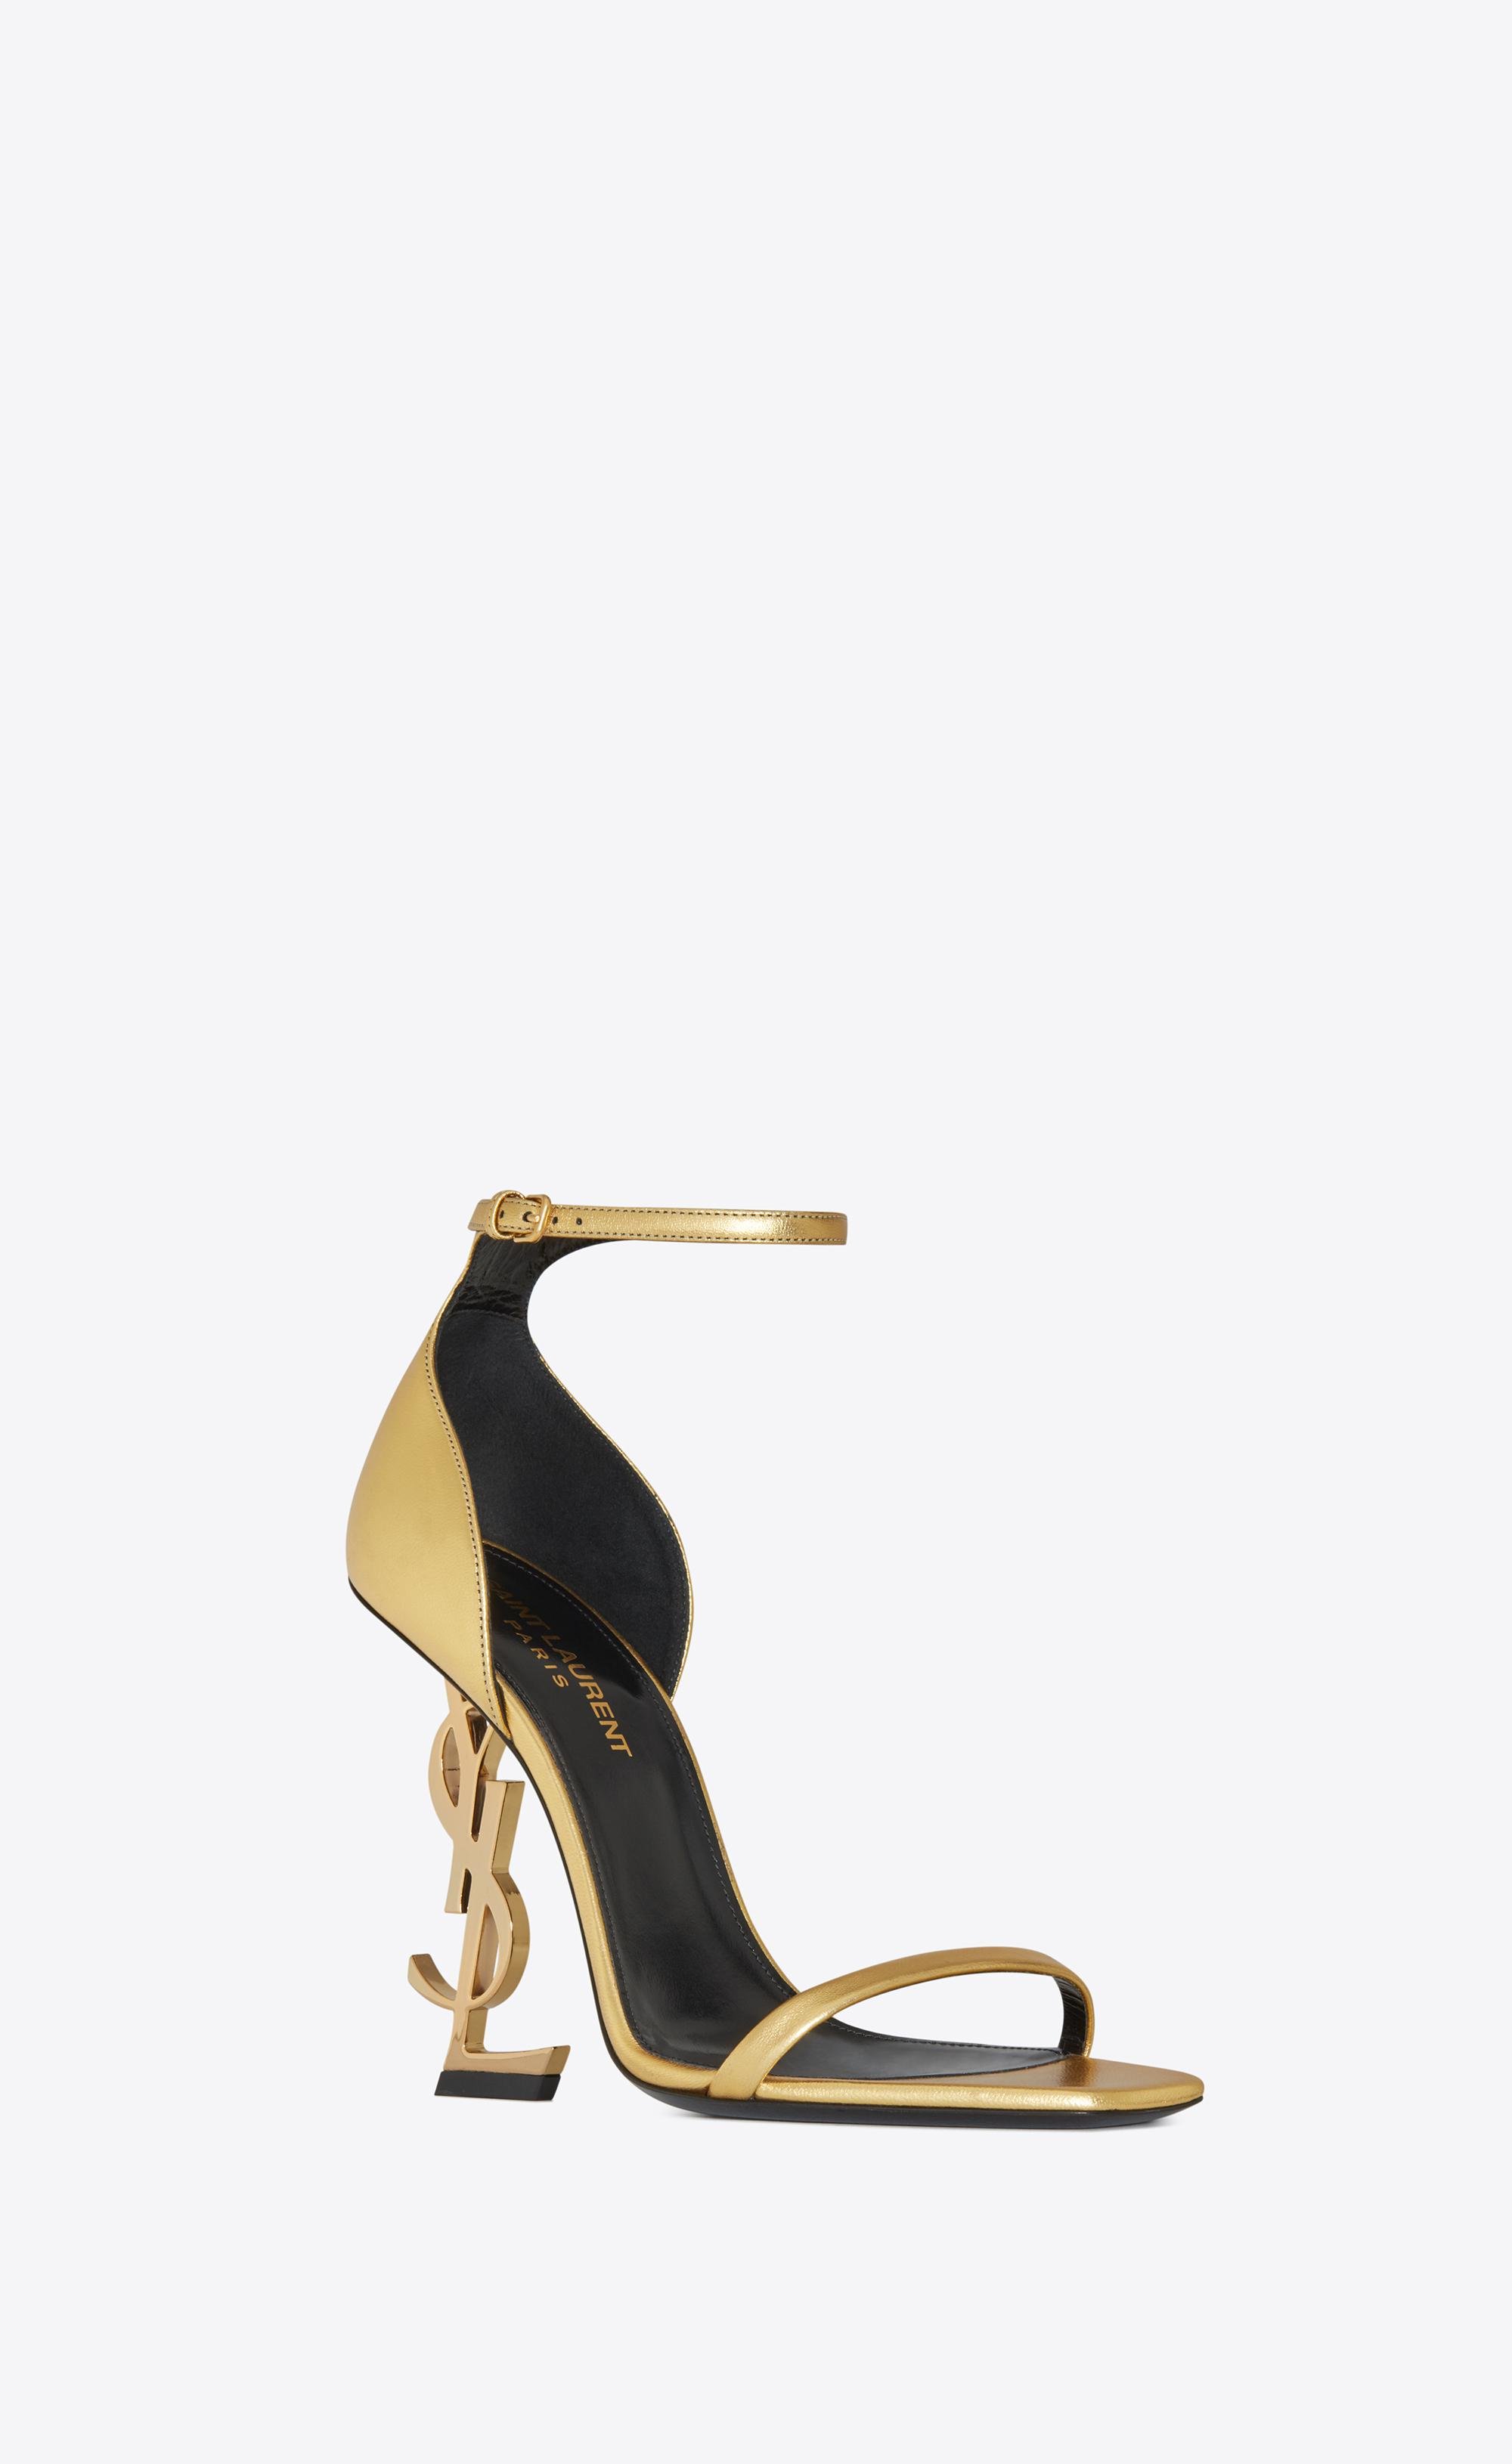 Saint Laurent Opyum Sandals With Gold-toned Heel In Smooth Leather